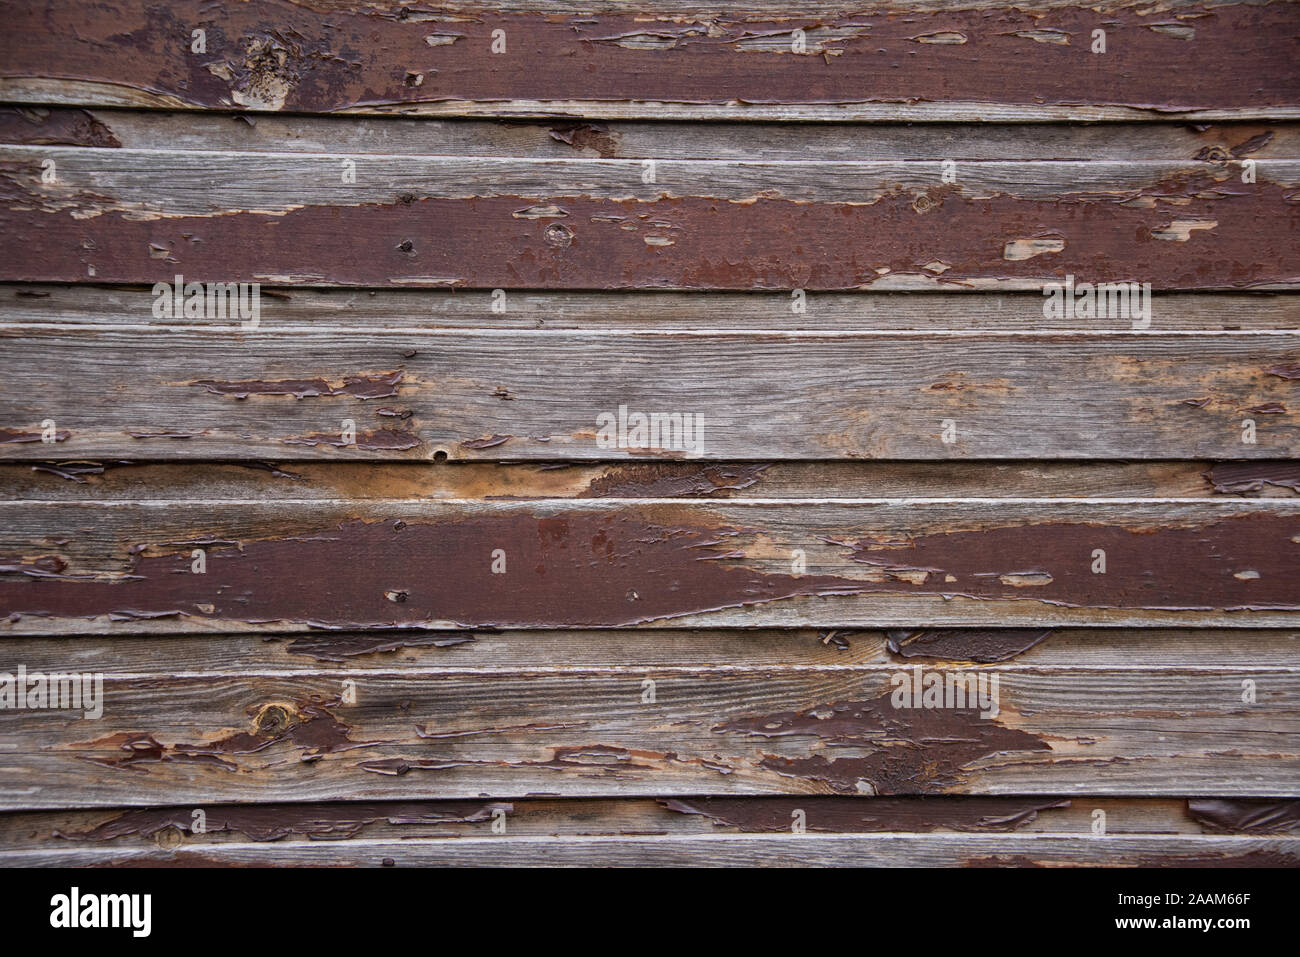 generic background of wooden half painted planks horizontal worn out brown paint Stock Photo